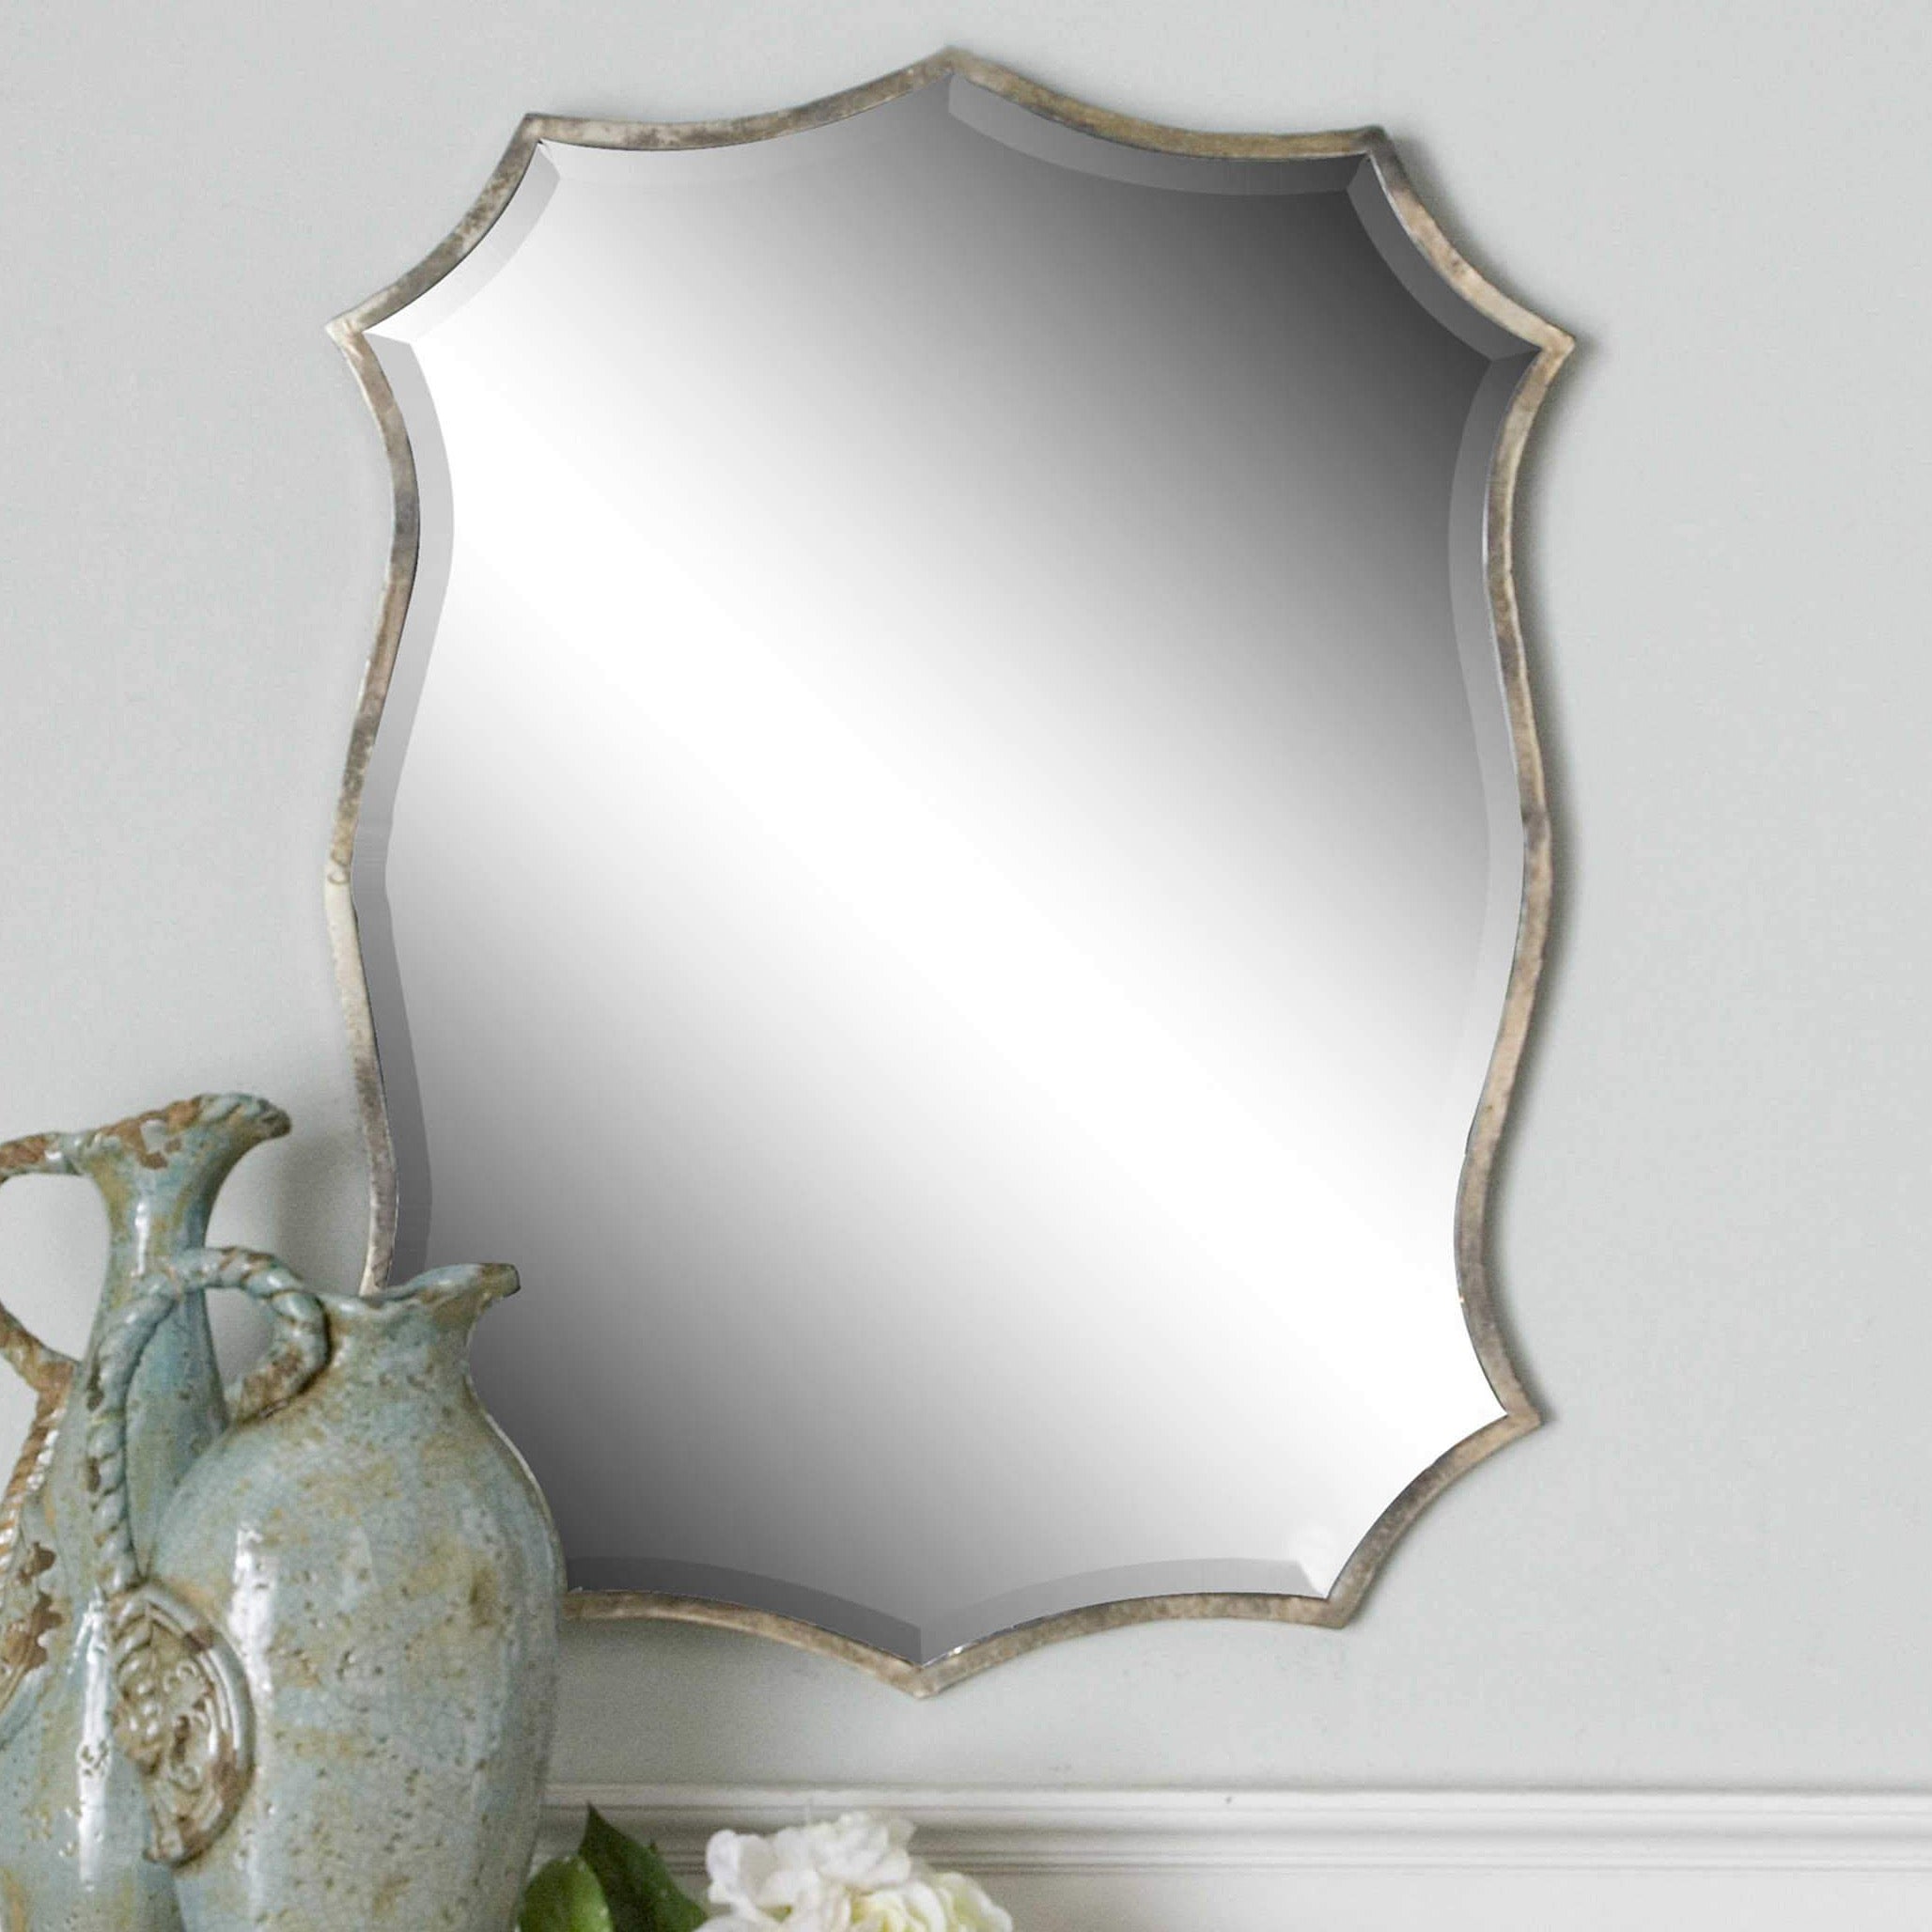 Mirror, Migiana - Danshire Market and Design , Hand forged metal frame featuring an oxidized, nickel plated finish. Mirror has a generous 1 1/4" bevel.  Dimensions: 23 W X 30 H X 1 D (in)